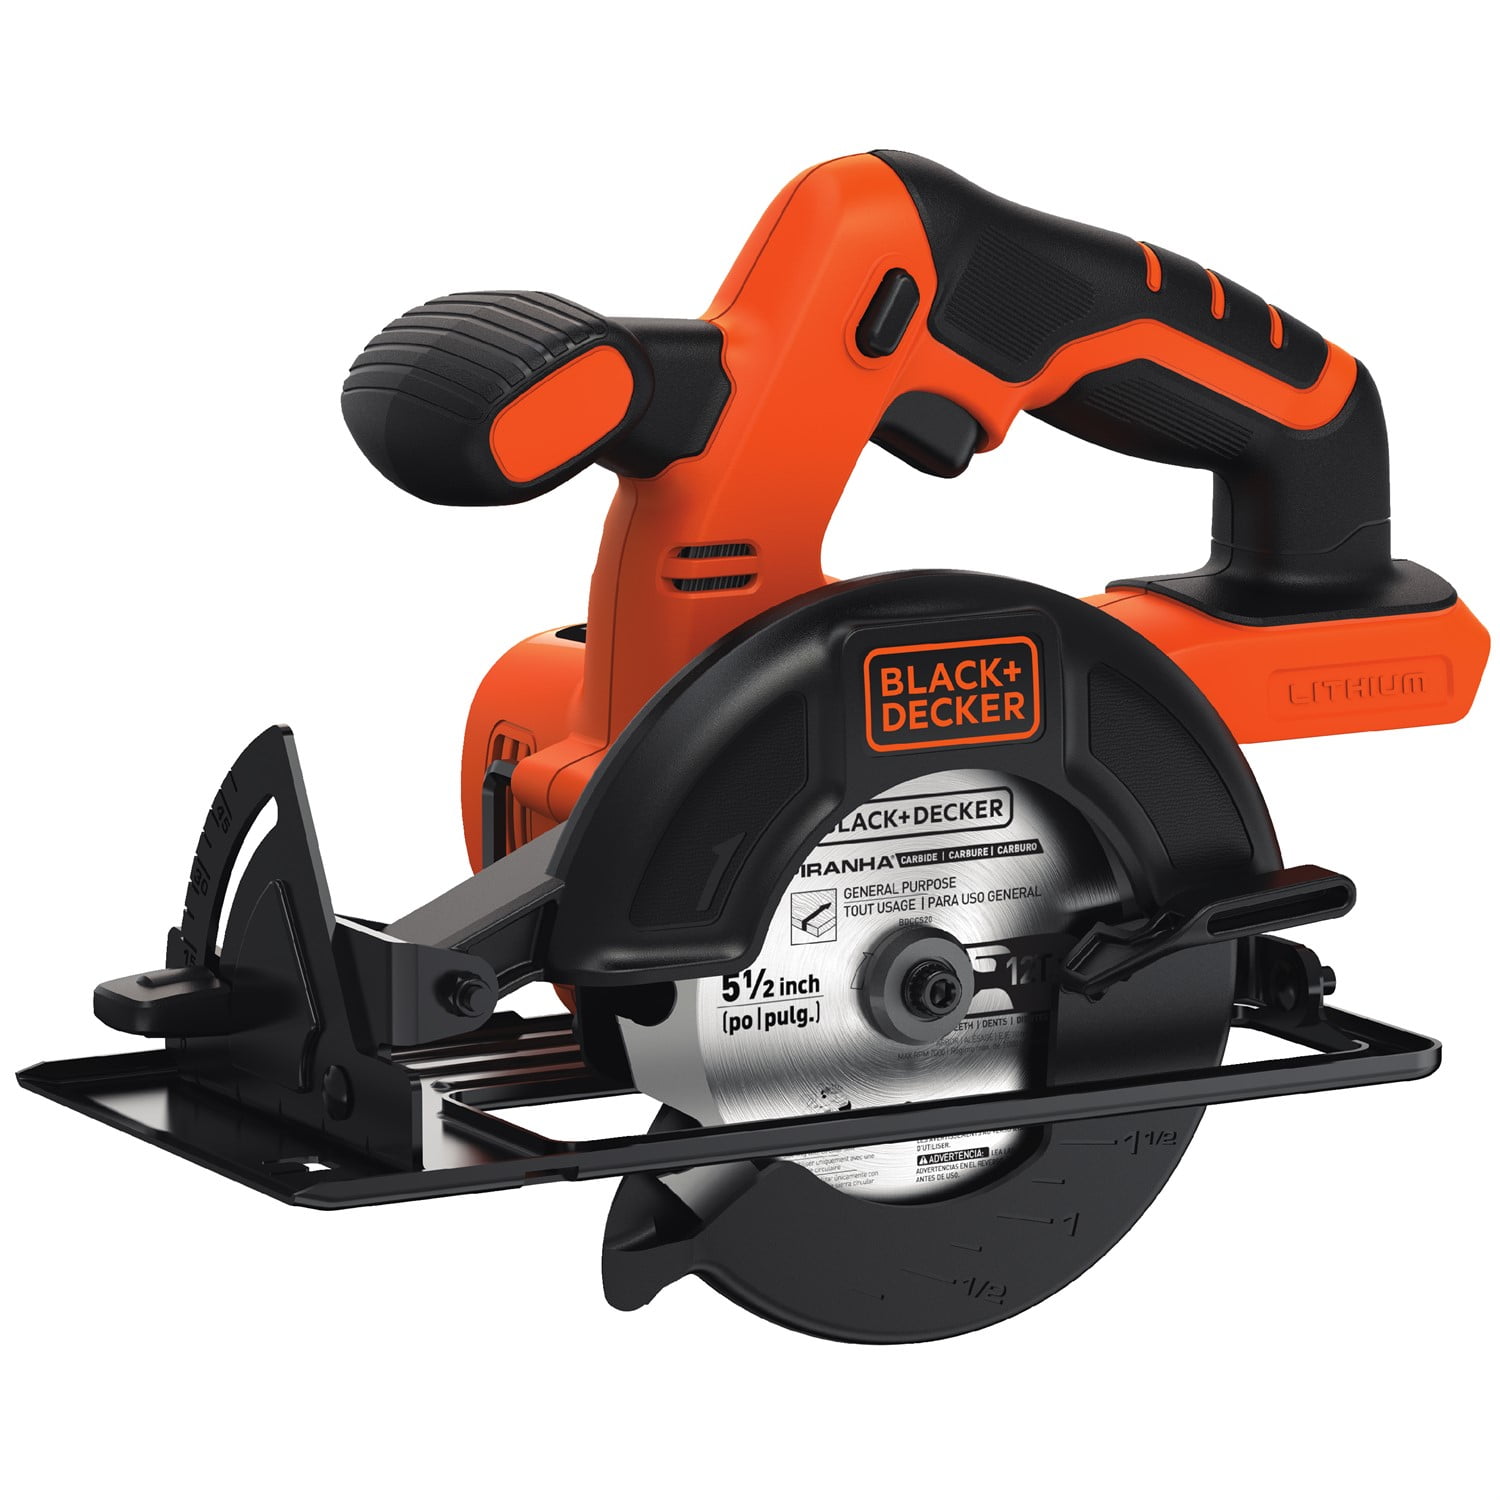 Black & Decker calar saw 12V BDCJS12N does not include charger or battery